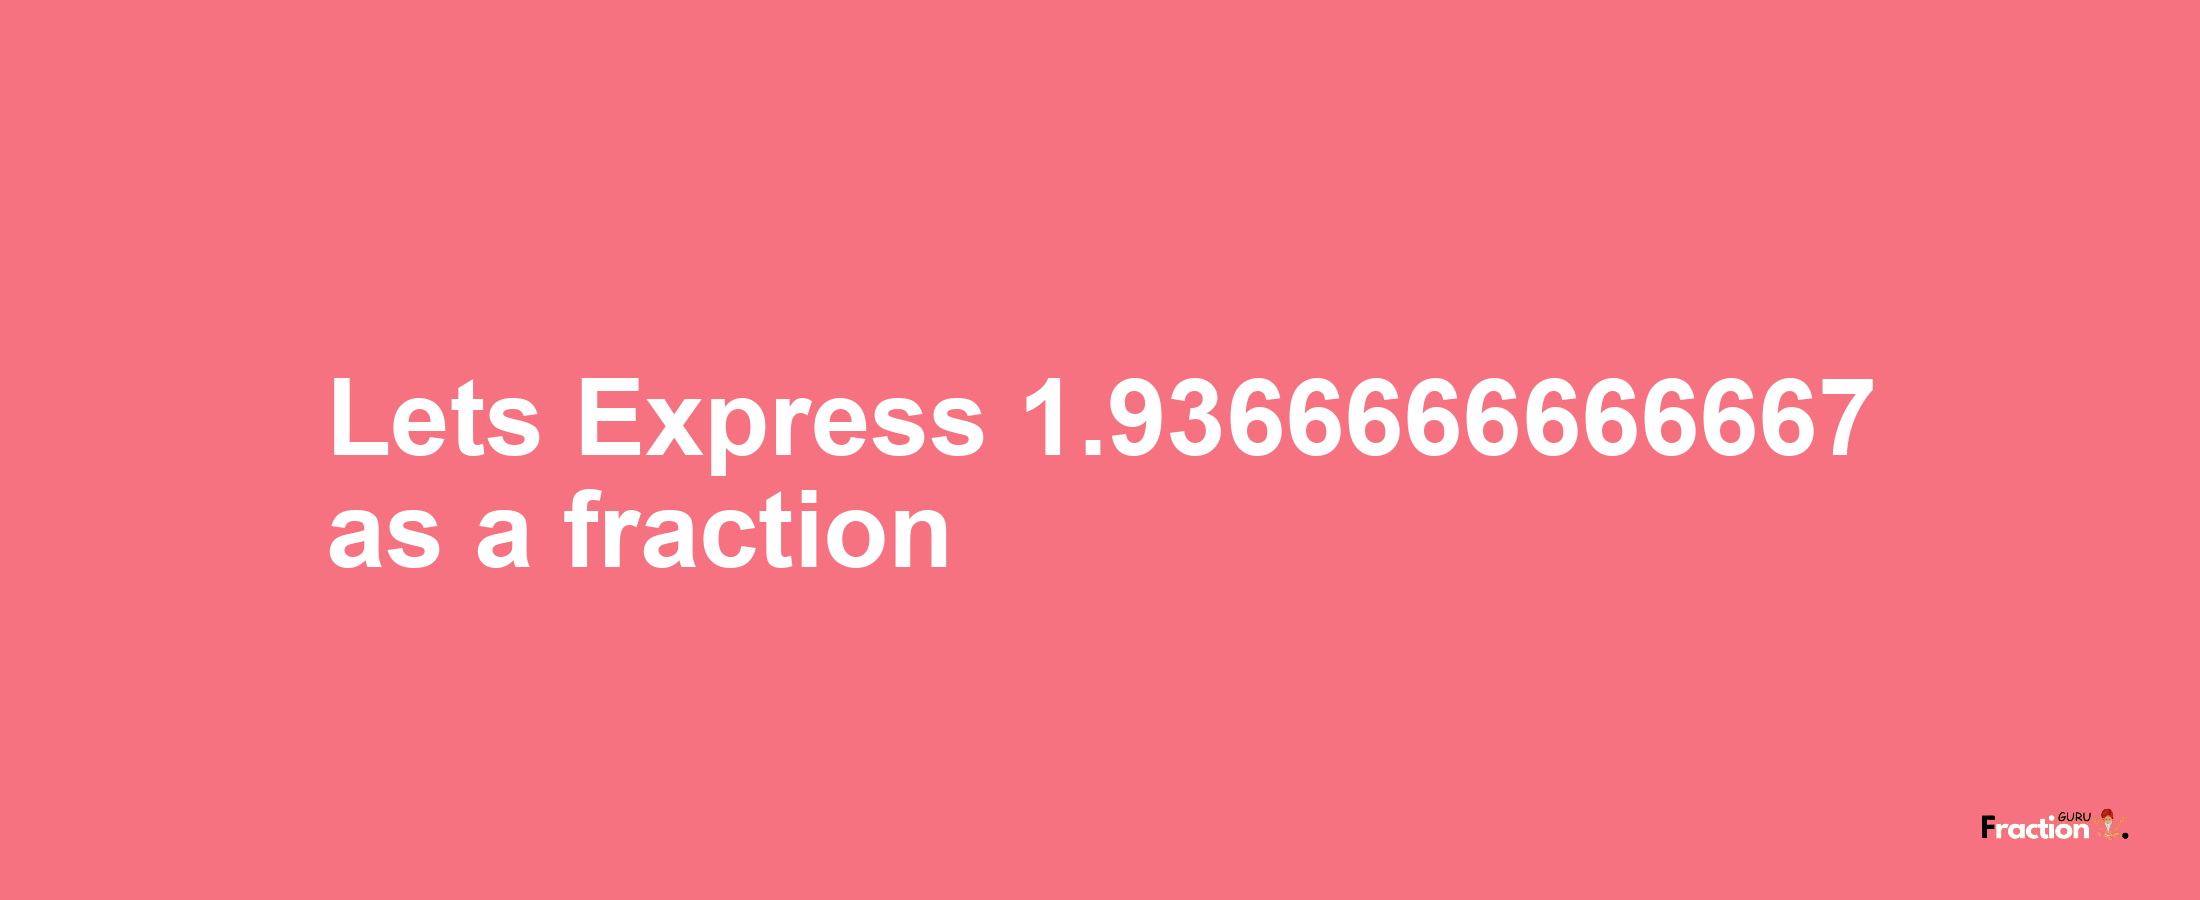 Lets Express 1.9366666666667 as afraction